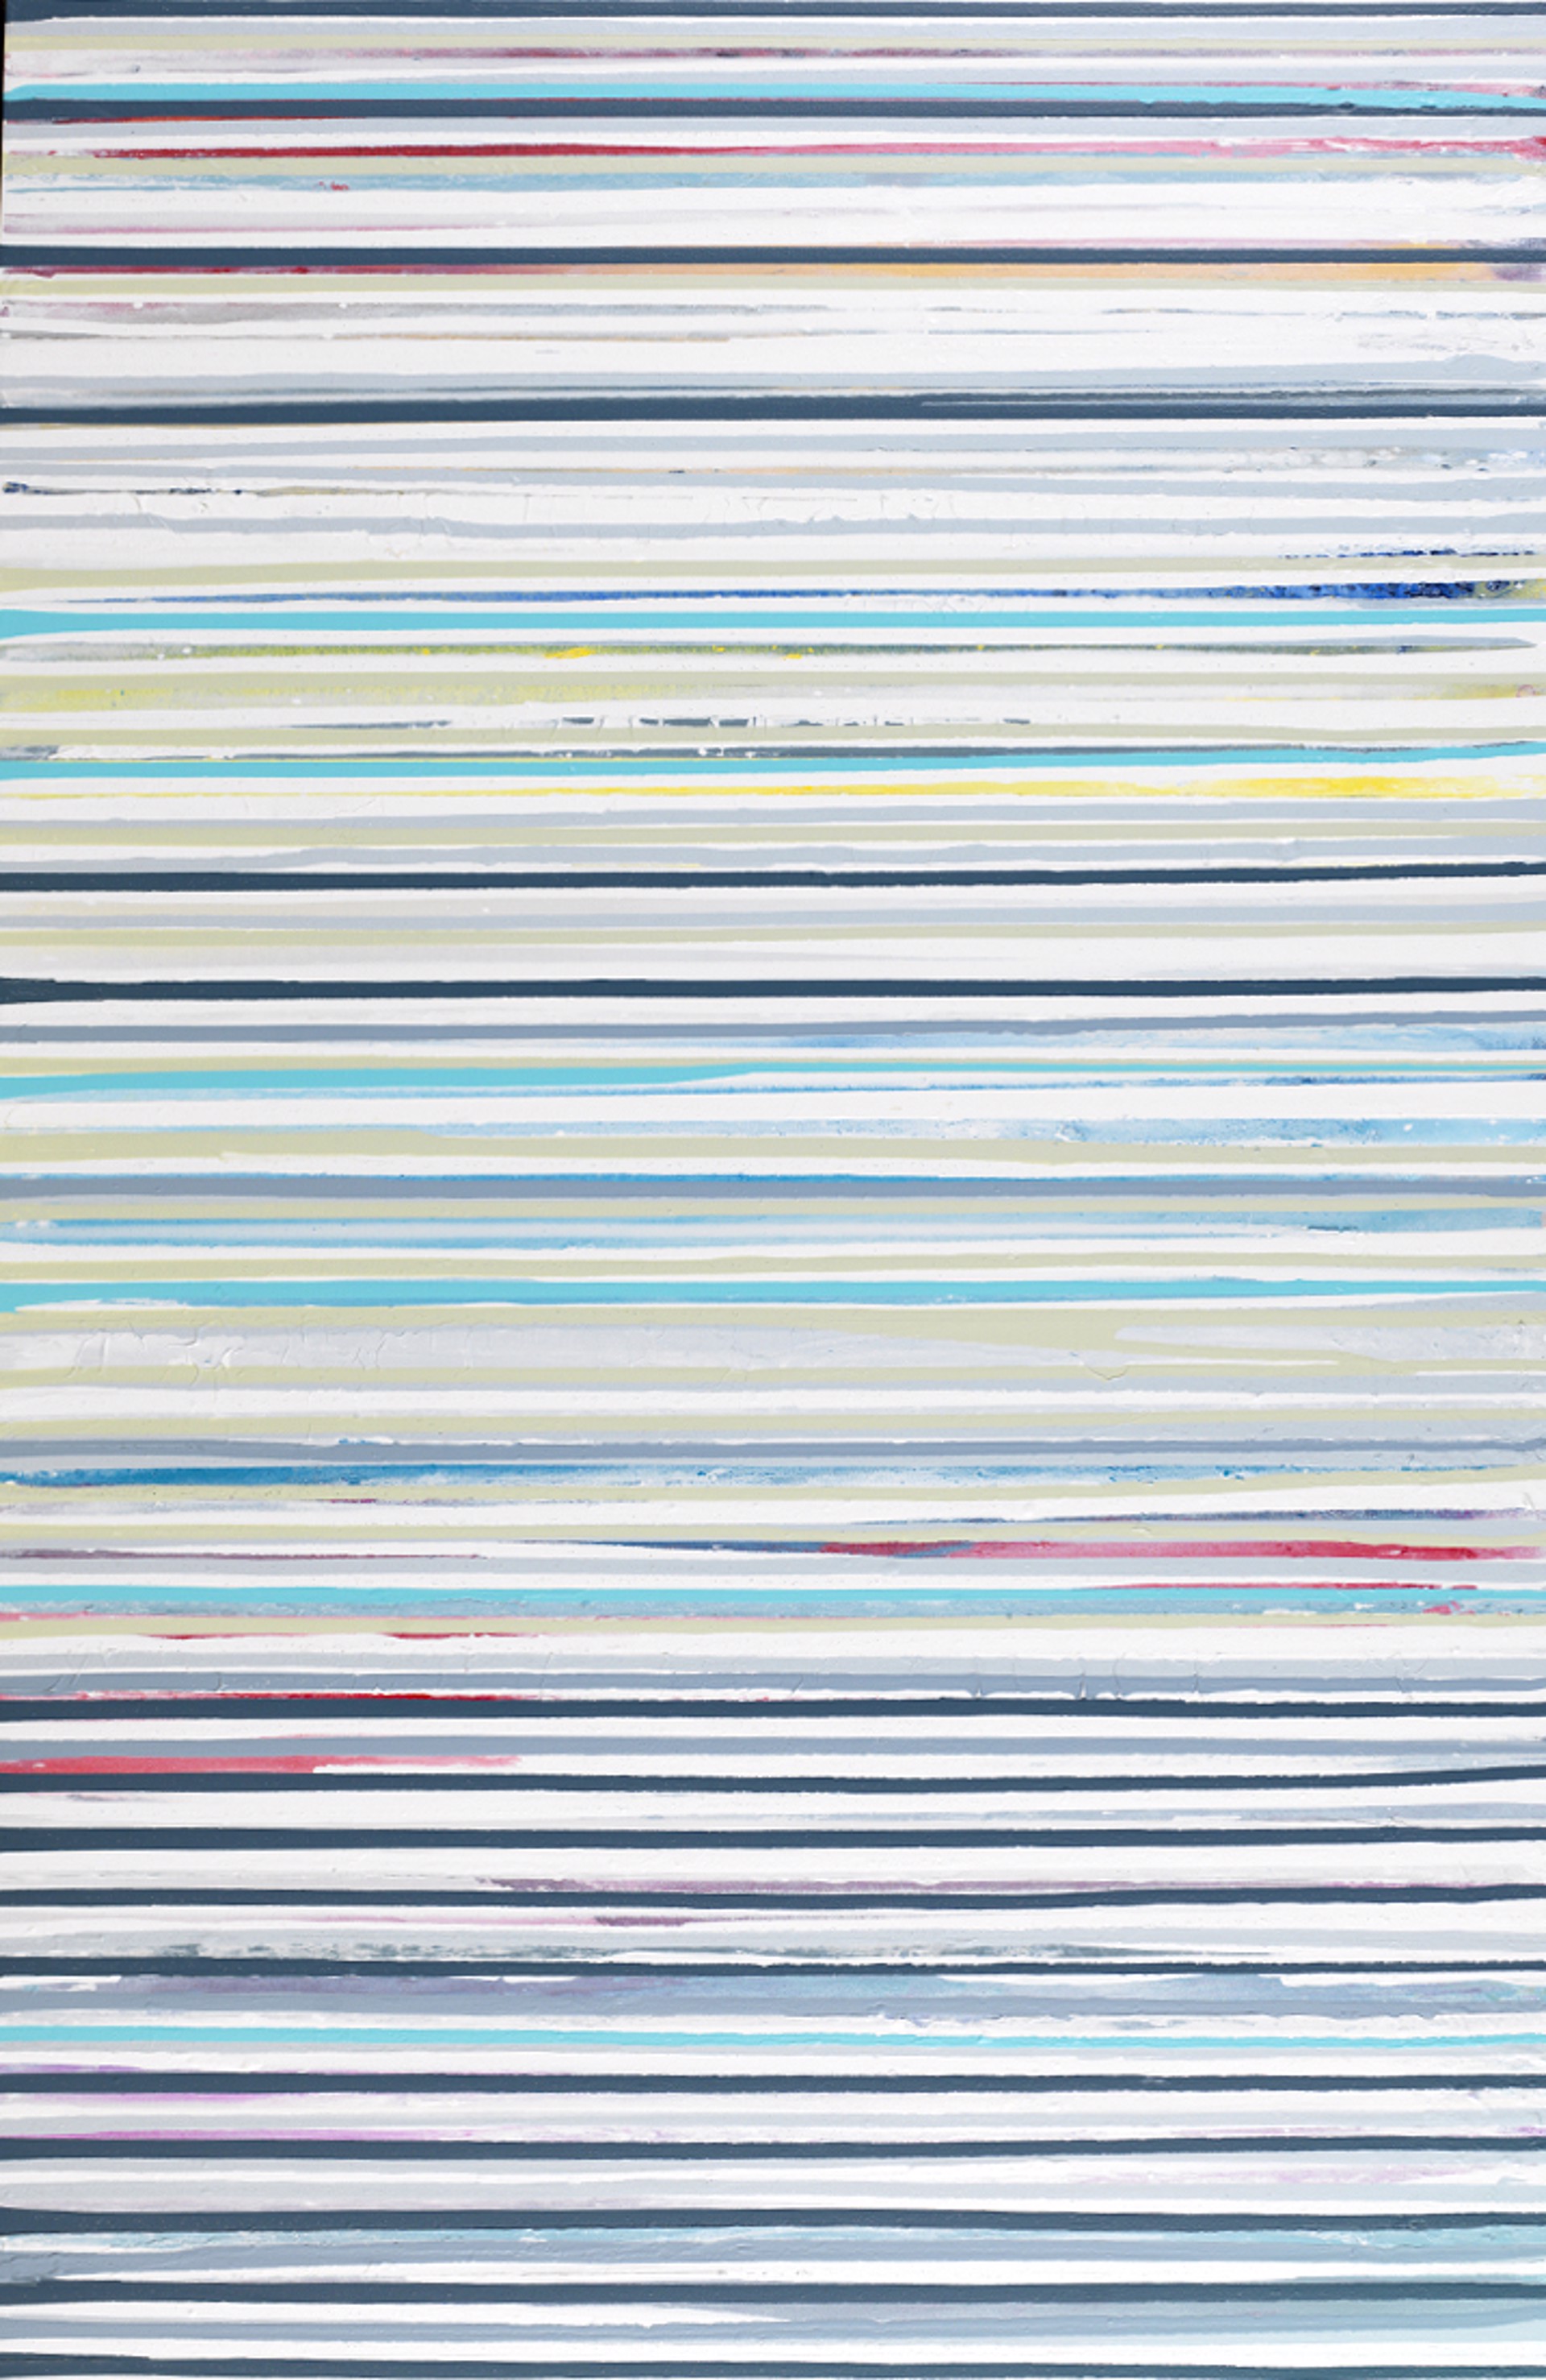 This is a photo of South Florida artist and painter John Schuyler's painting Linea #10. It is 60"H x 40"W and features a wide array of horizontal stripes in grays, blues, pinks and more to deliver a beautiful abstract painting.